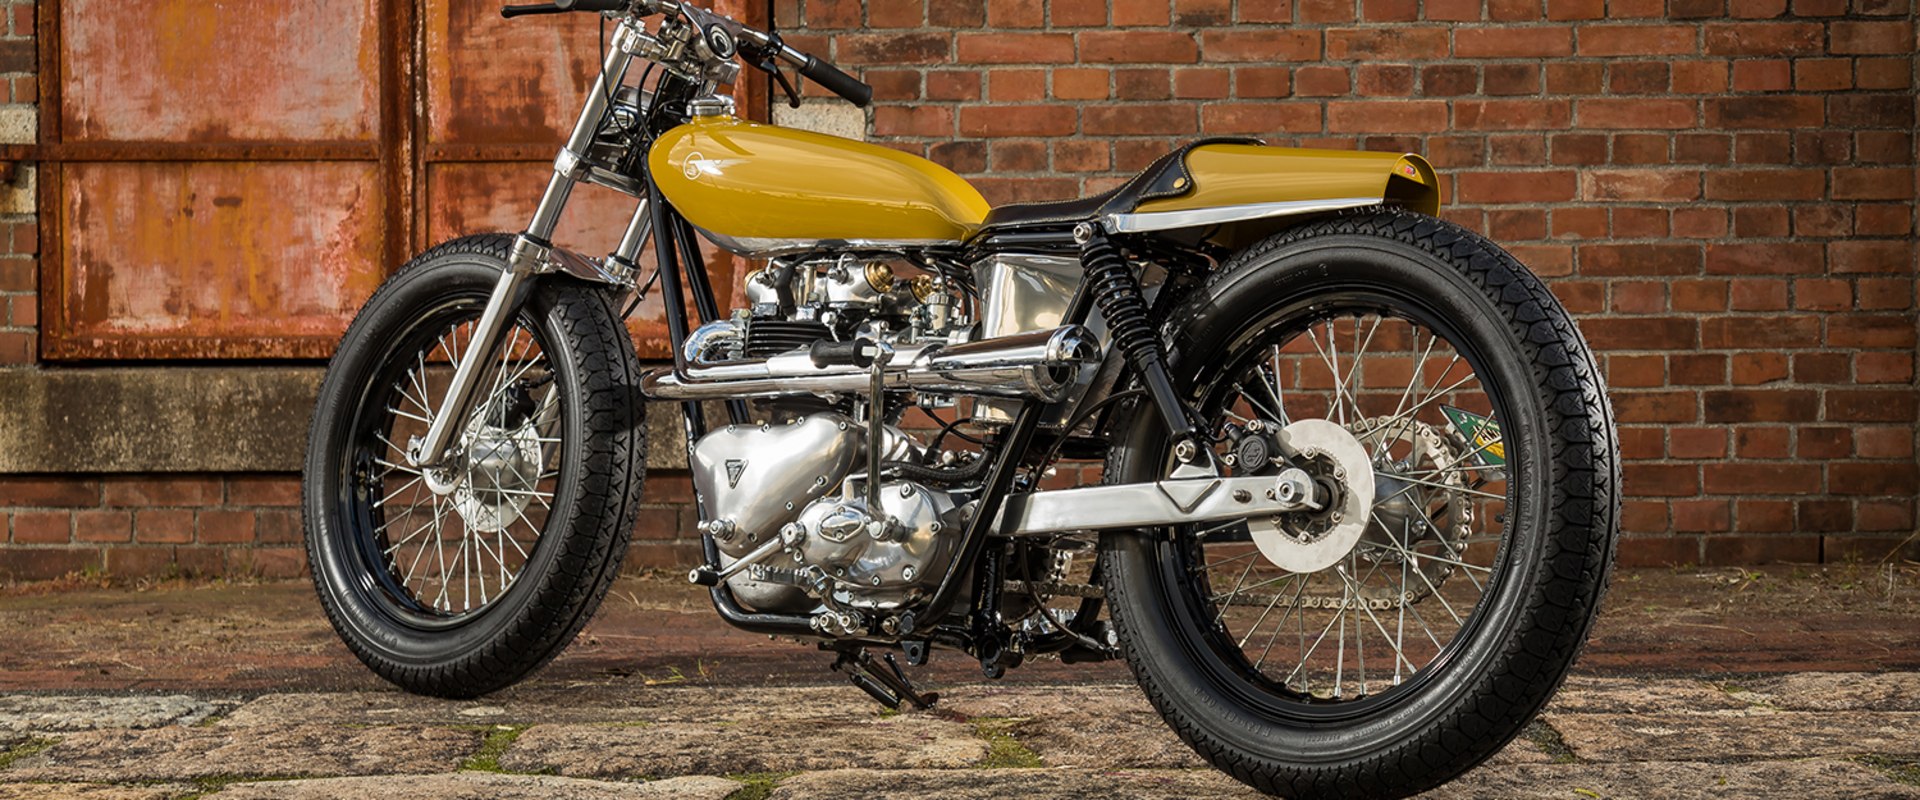 The Story of Triumph: From Custom Motorcycle Builders to Leading Brand